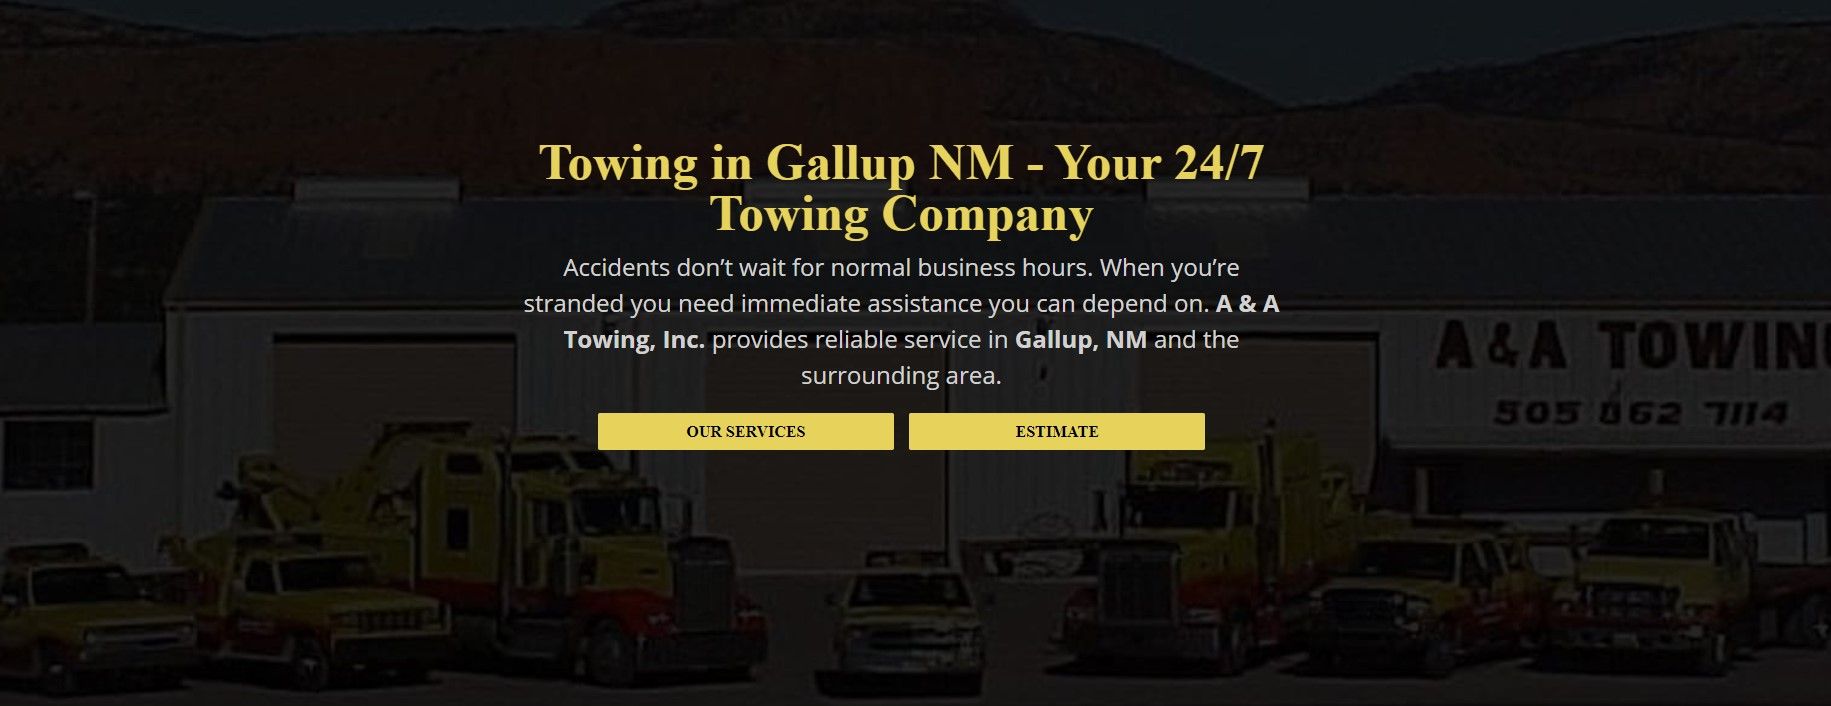 Services & Products A & A Towing in Continental Divide NM